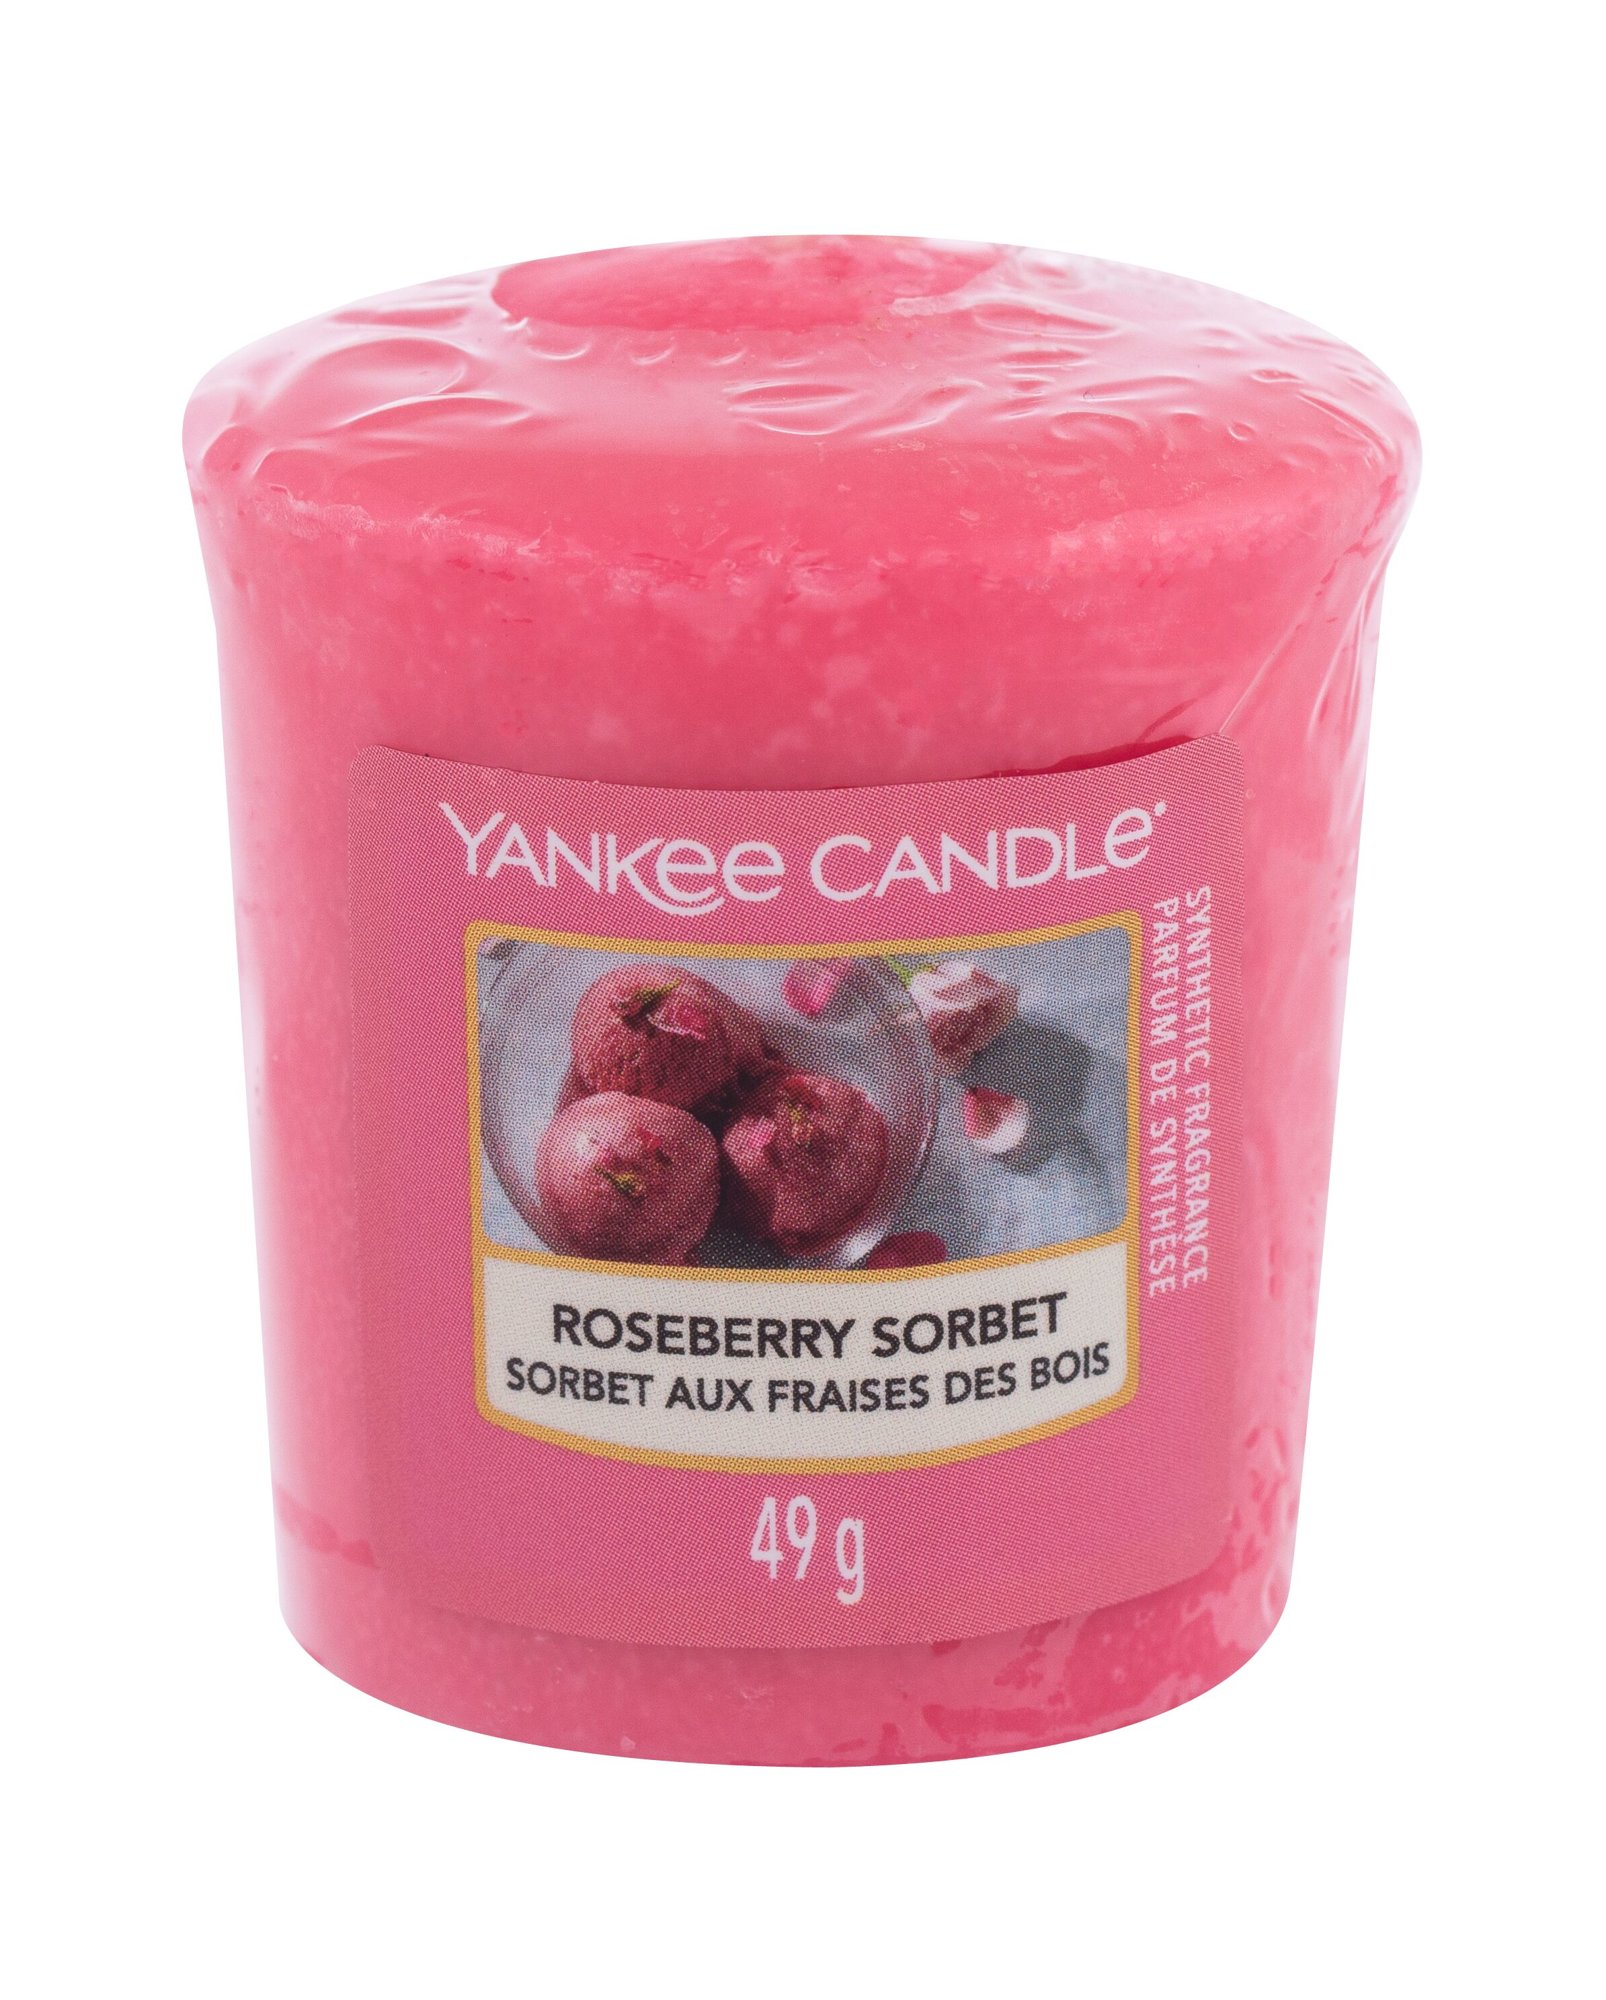 Yankee Candle Roseberry Sorbet 49g Kvepalai Unisex Scented Candle